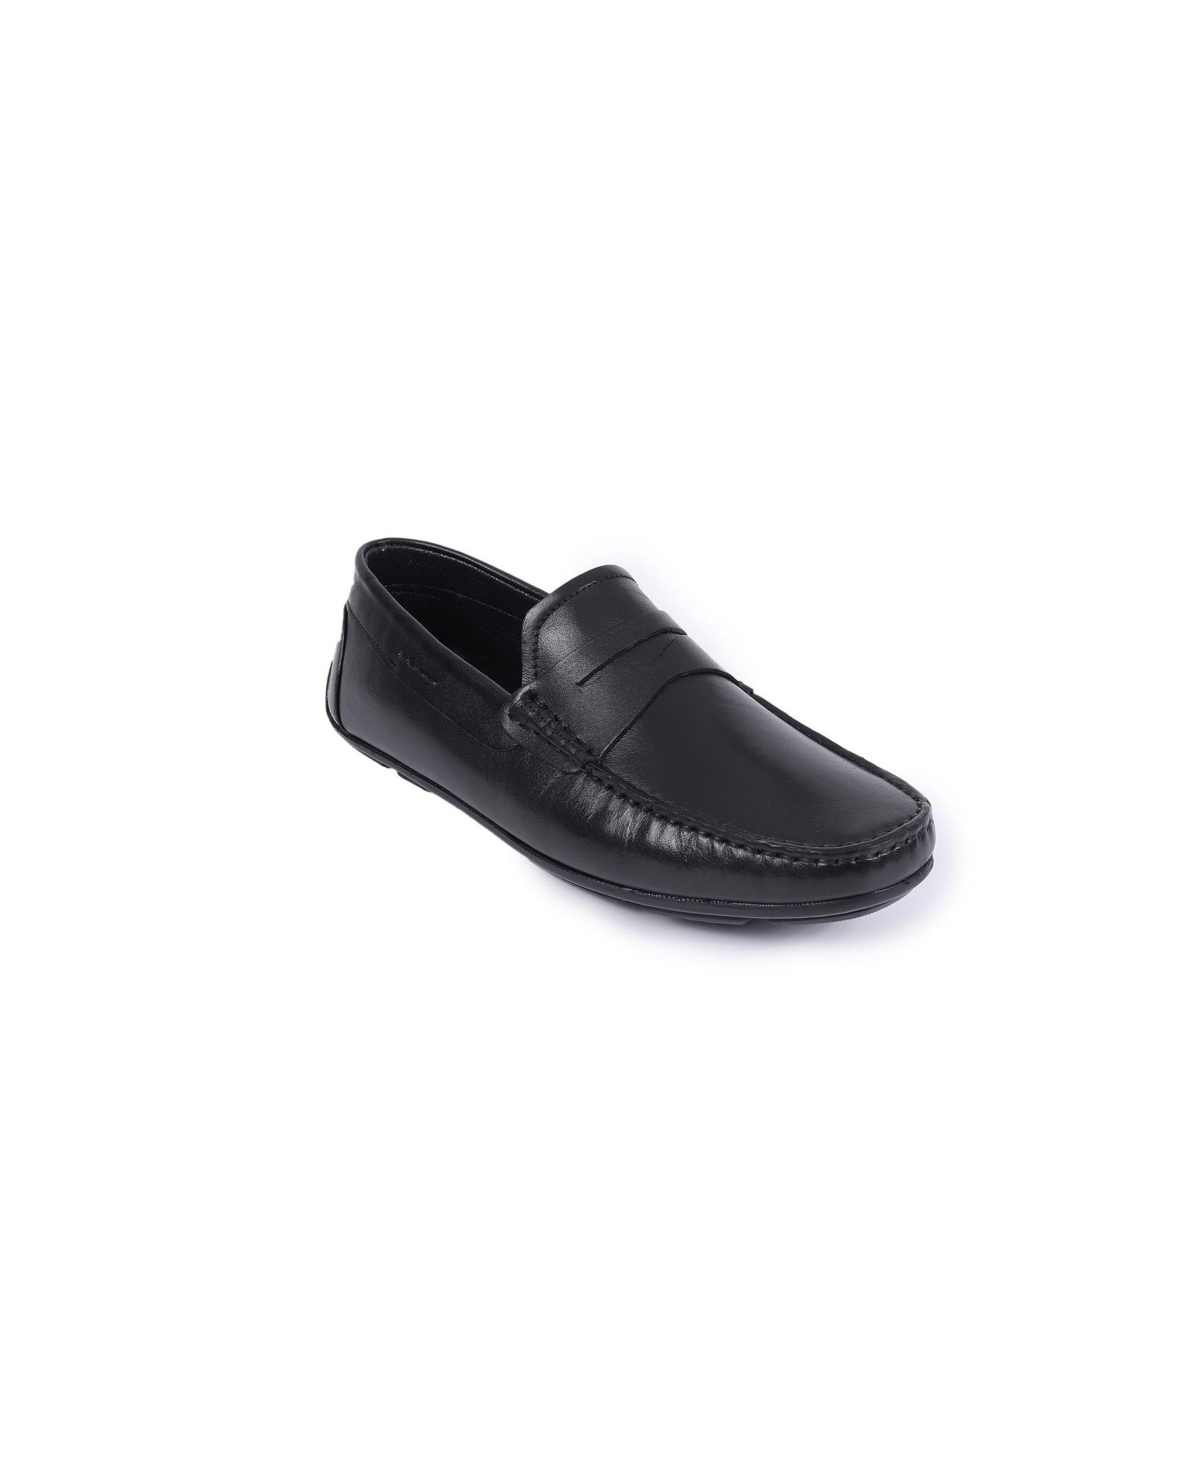 VELLAPAIS MEN'S JASMINE LEATHER ALL DAY COMFORT DRIVERS